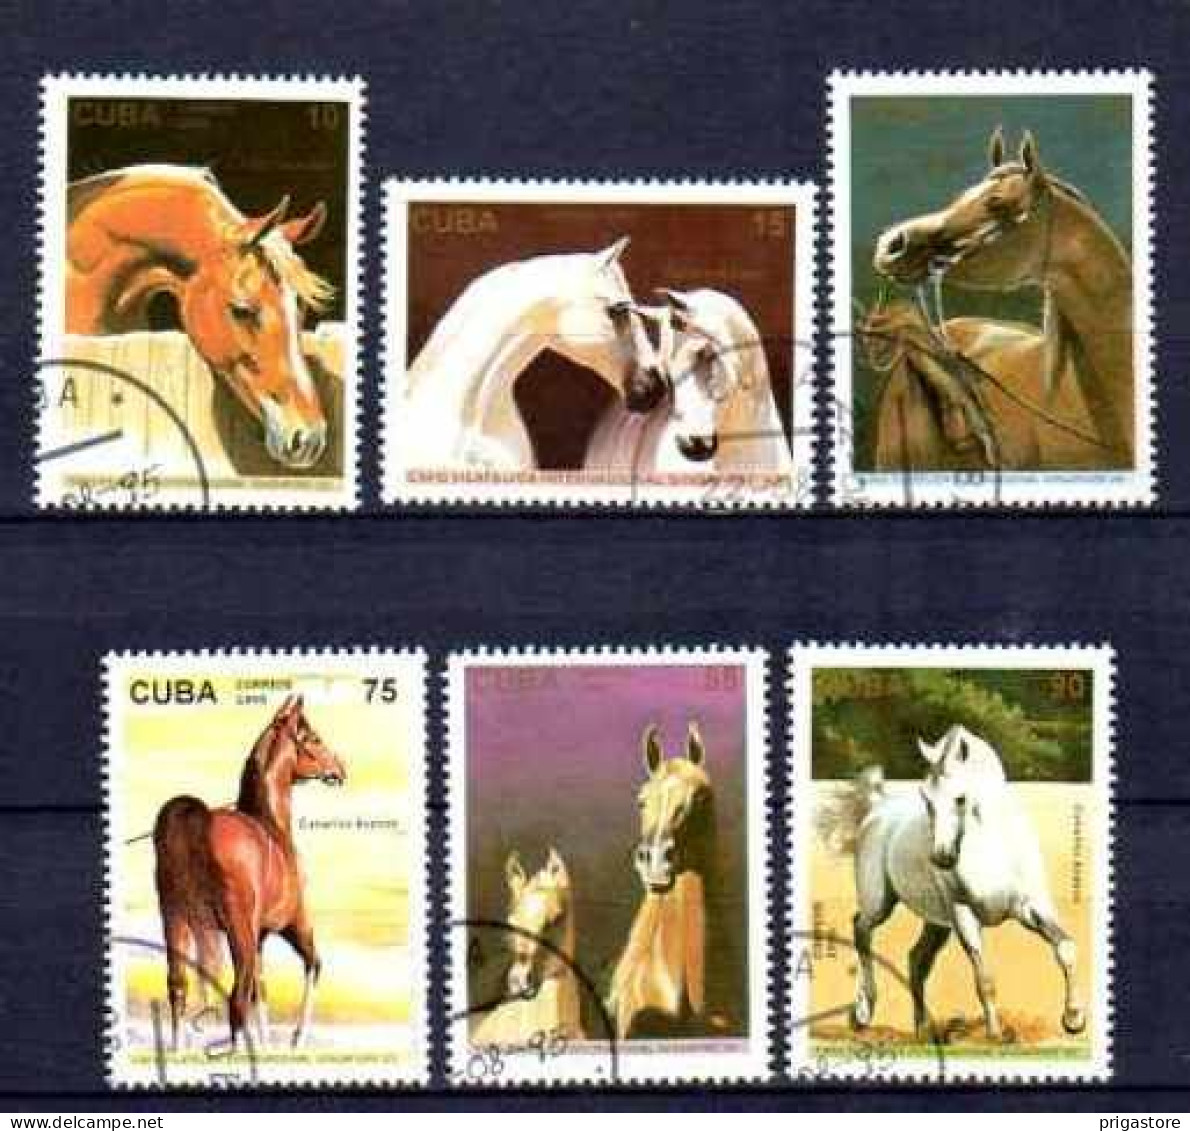 Cuba 1995 Chevaux (5) Yvert N° 3455 à 3460 Oblitéré Used - Used Stamps